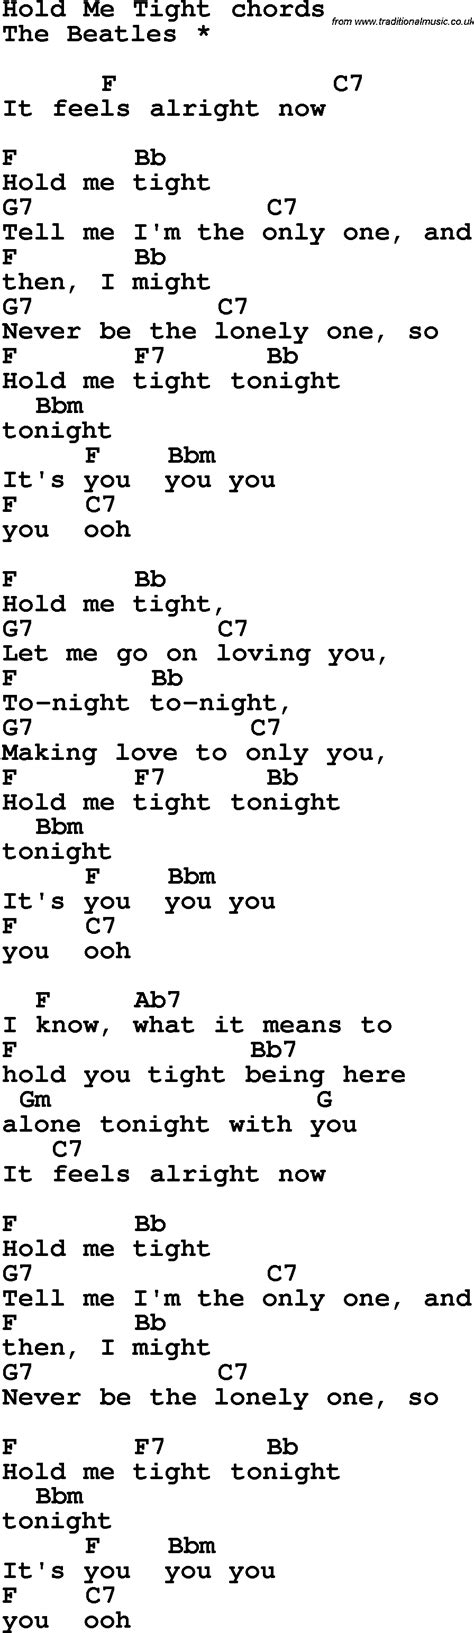 Song Lyrics With Guitar Chords For Hold Me Tight The Beatles